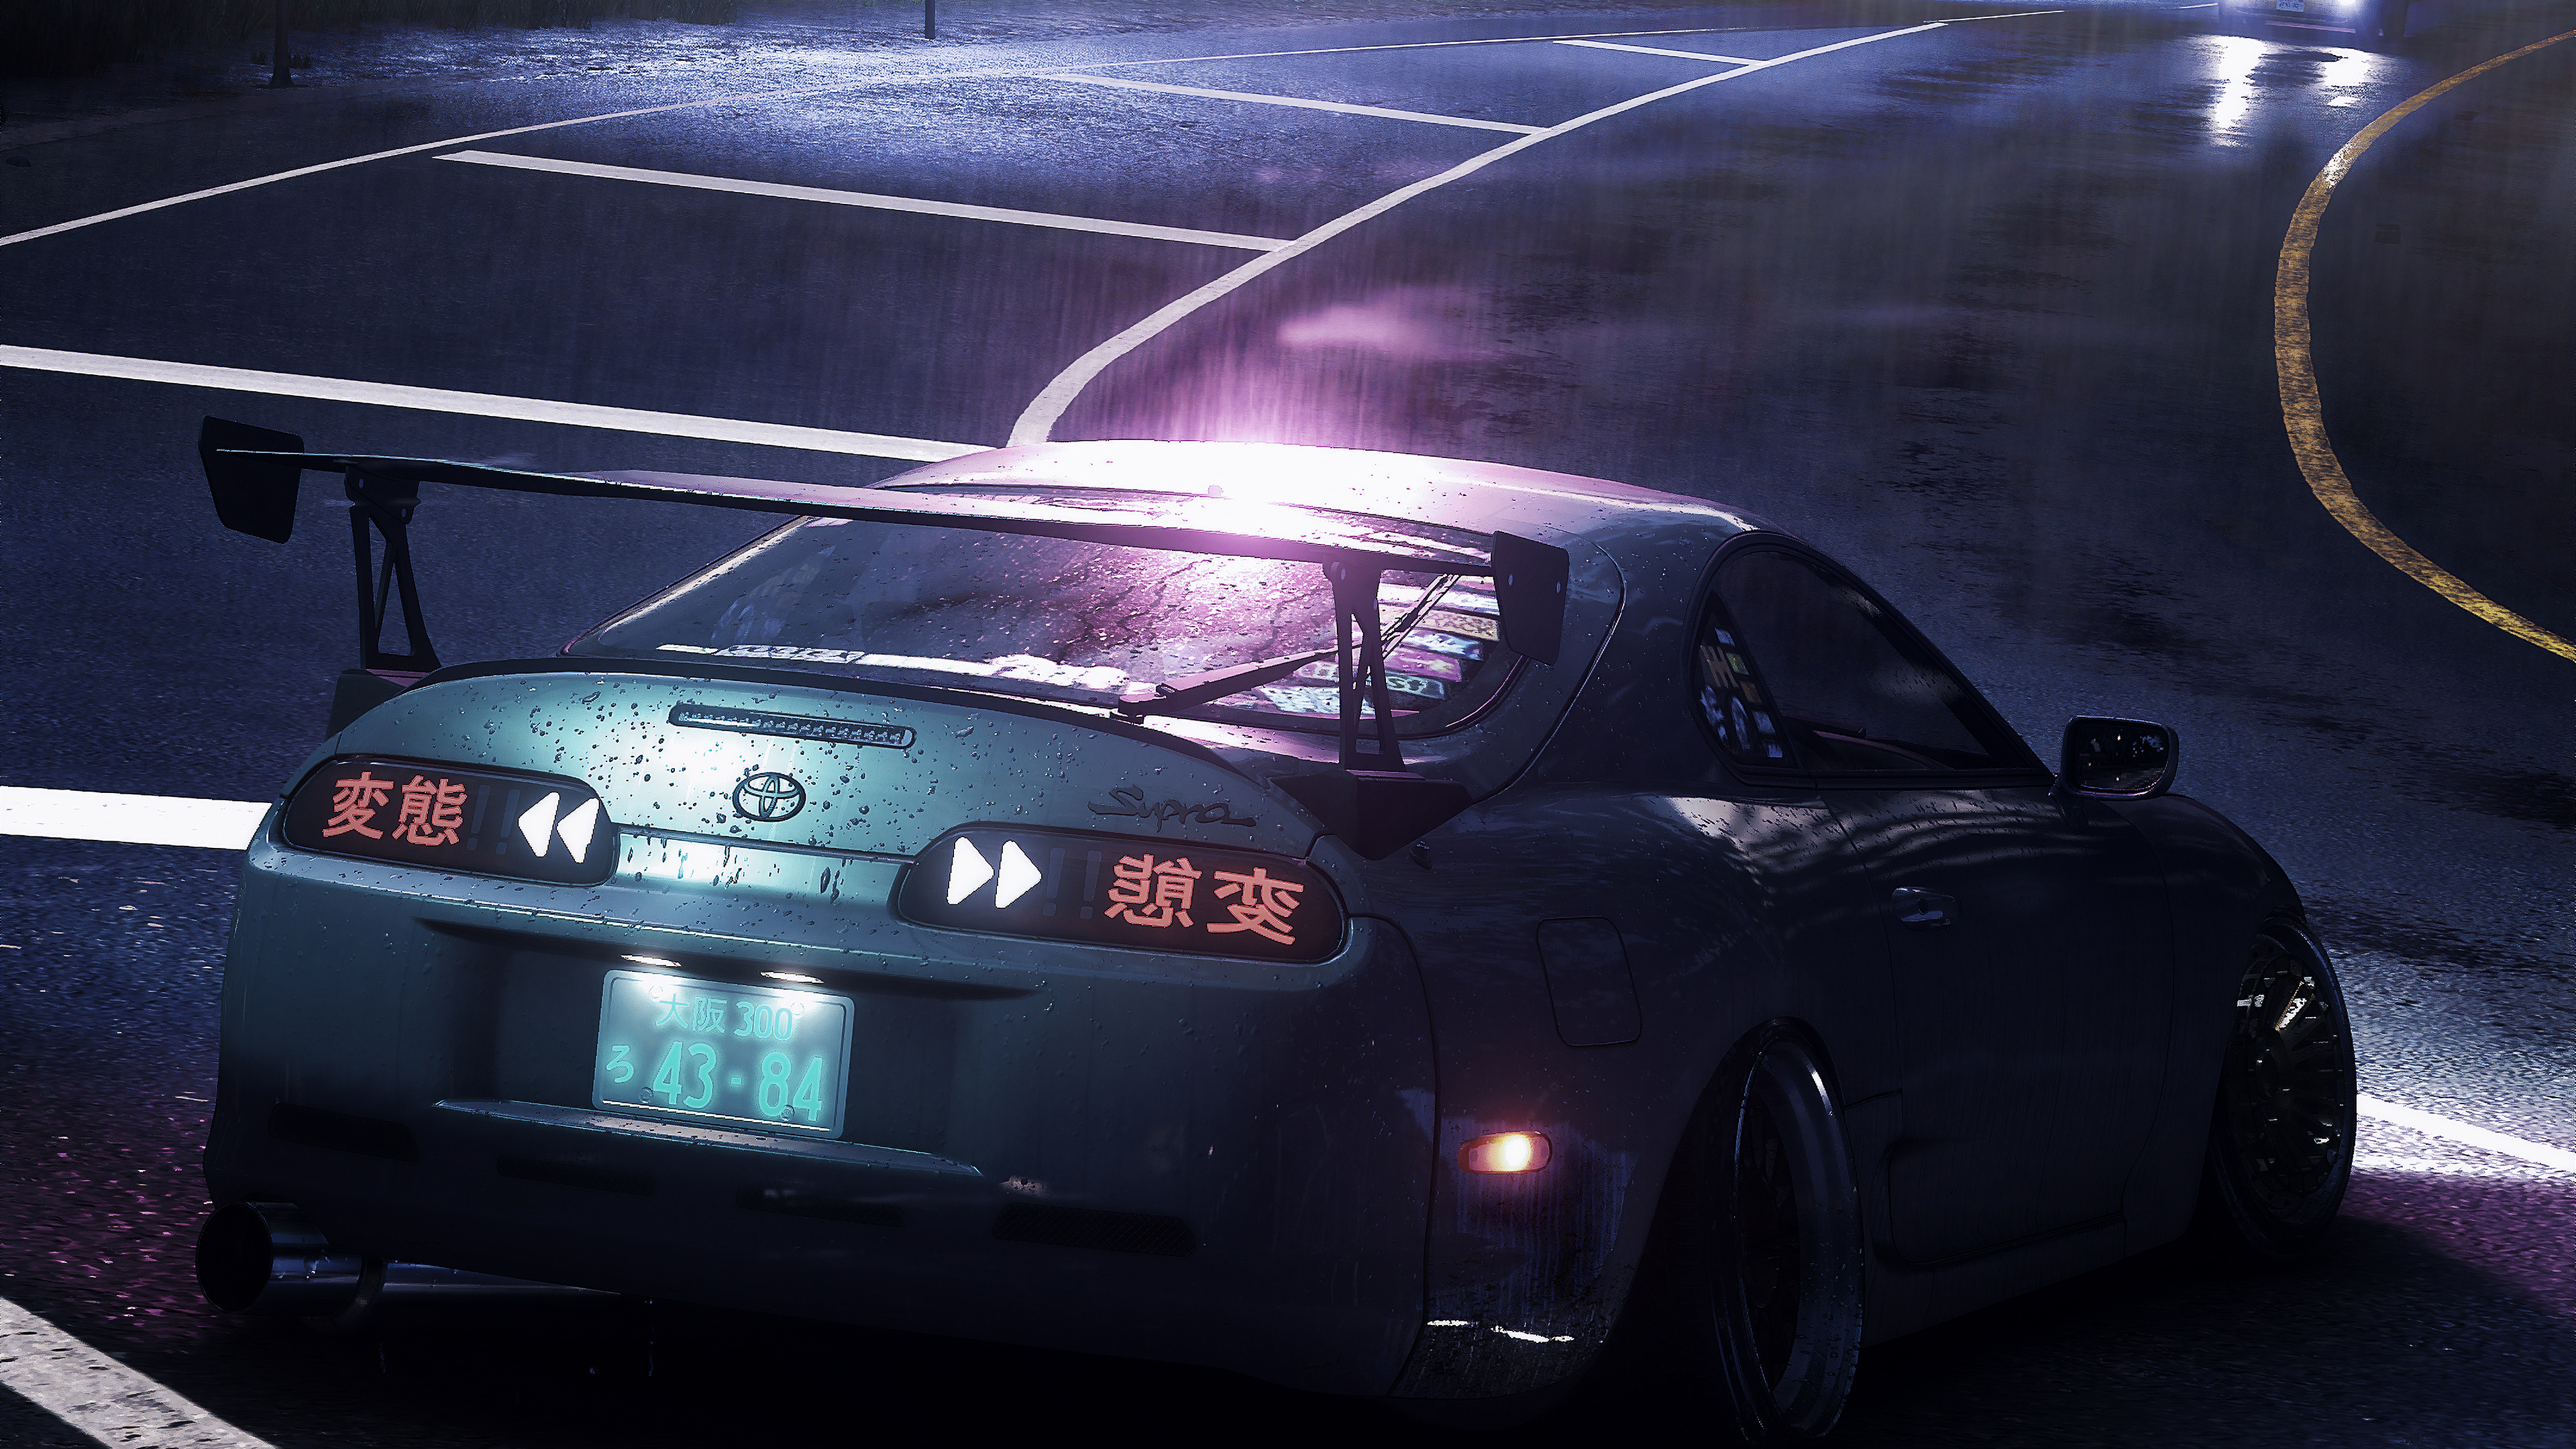 toyota supra need for speed 1563221749 - Toyota Supra Need For Speed - toyota wallpapers, toyota supra wallpapers, need for speed wallpapers, hd-wallpapers, games wallpapers, 4k-wallpapers